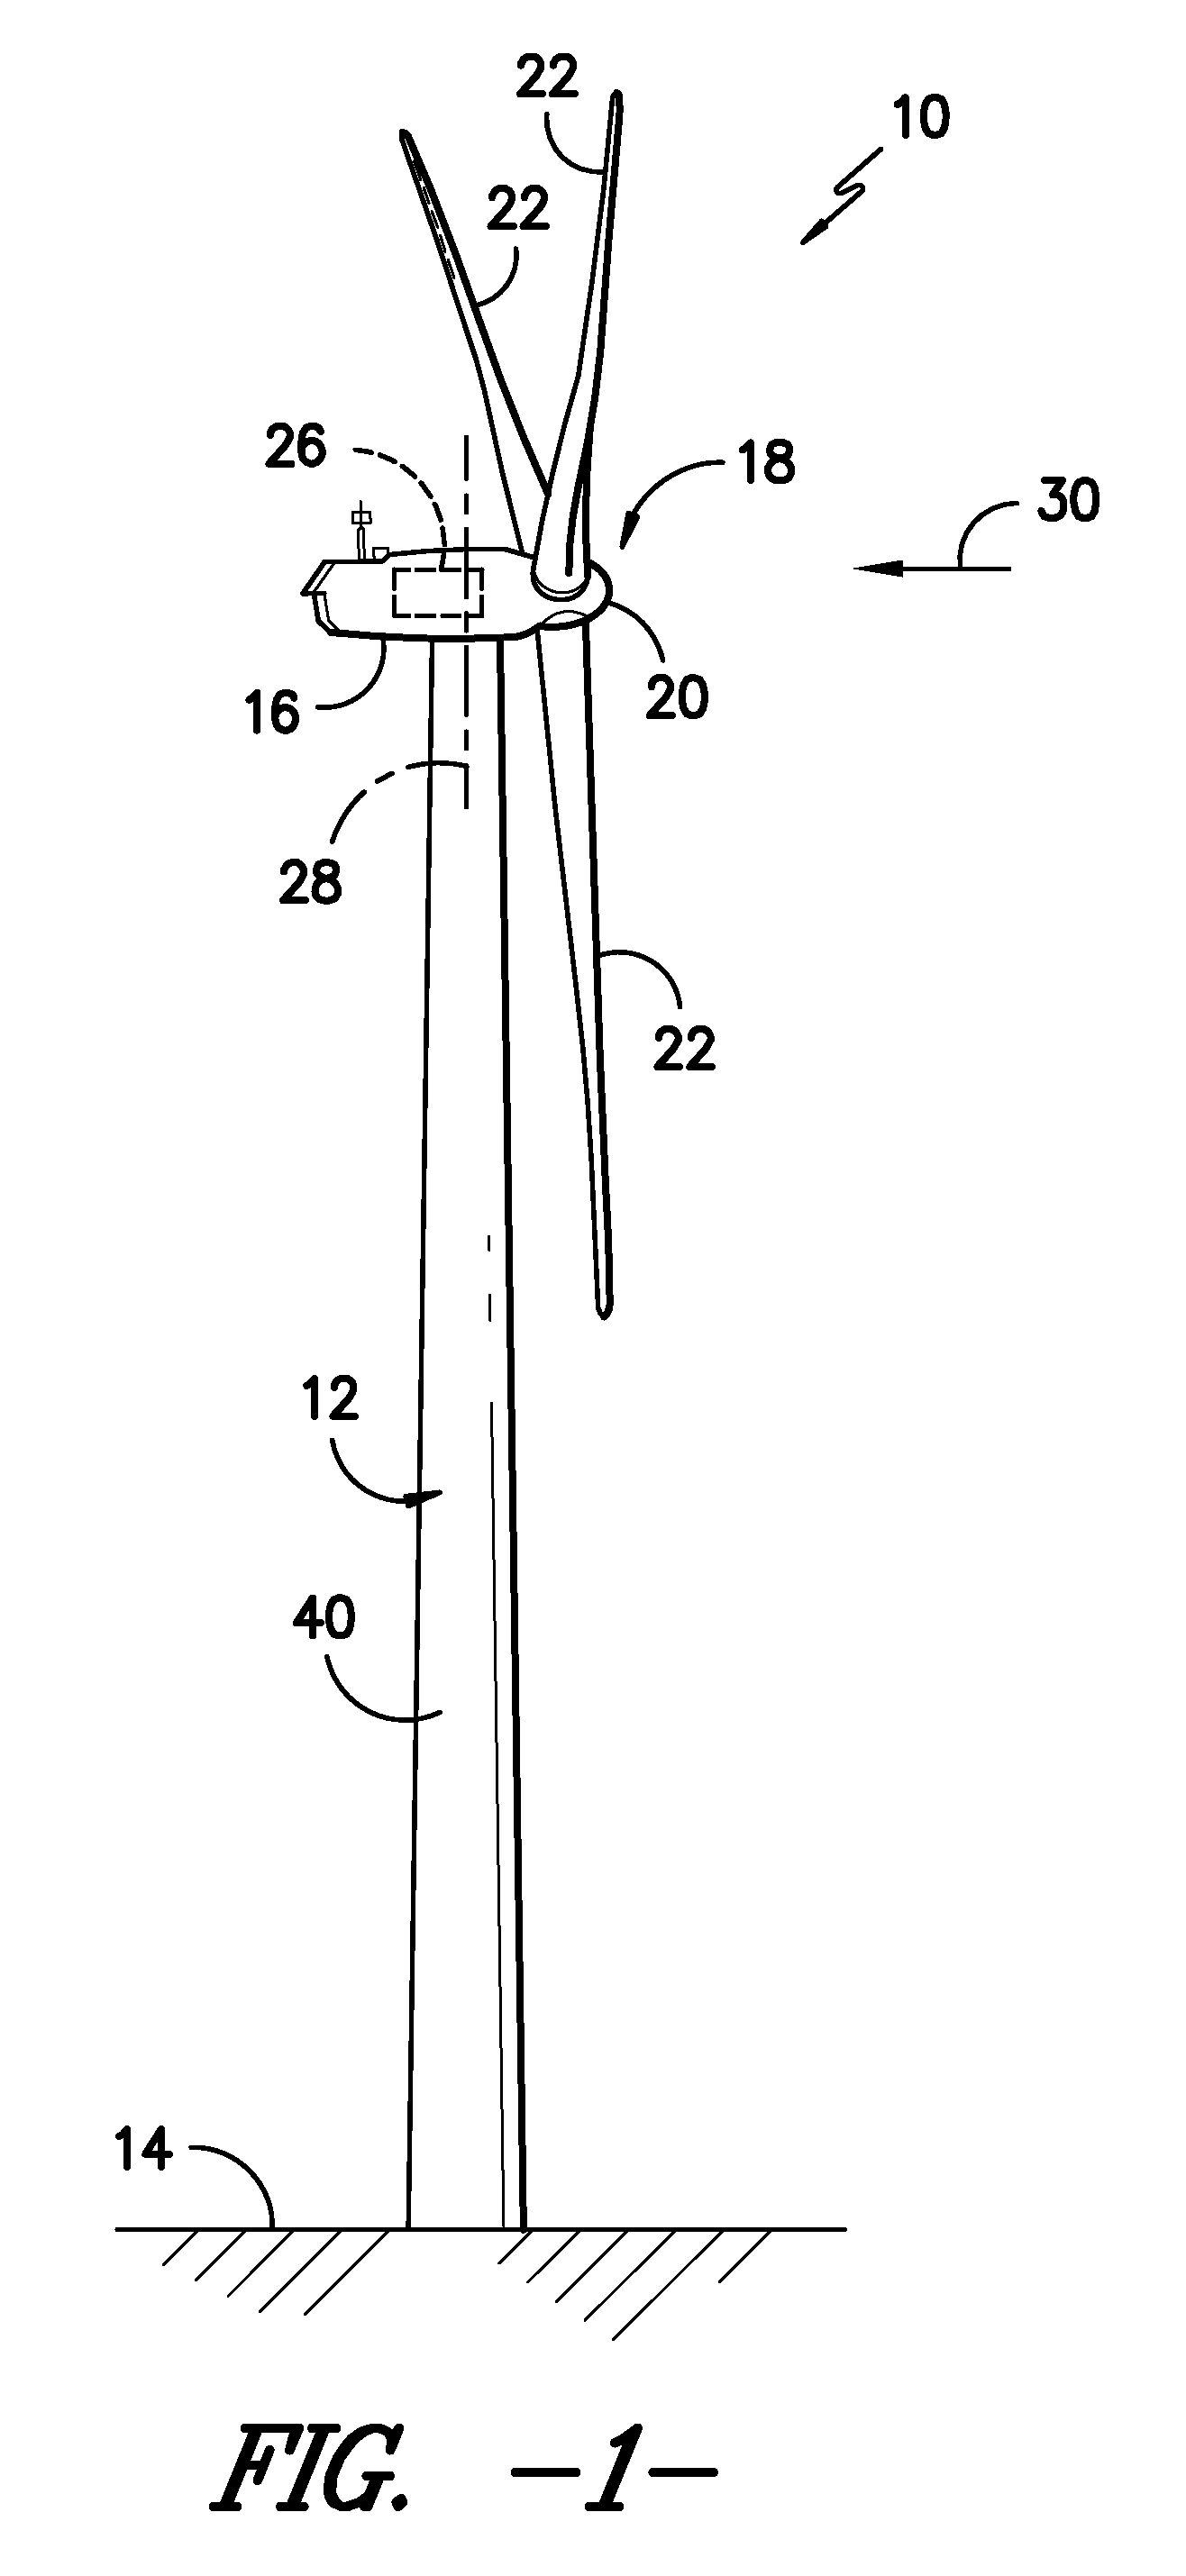 Yaw bearing assembly and tower for wind turbine